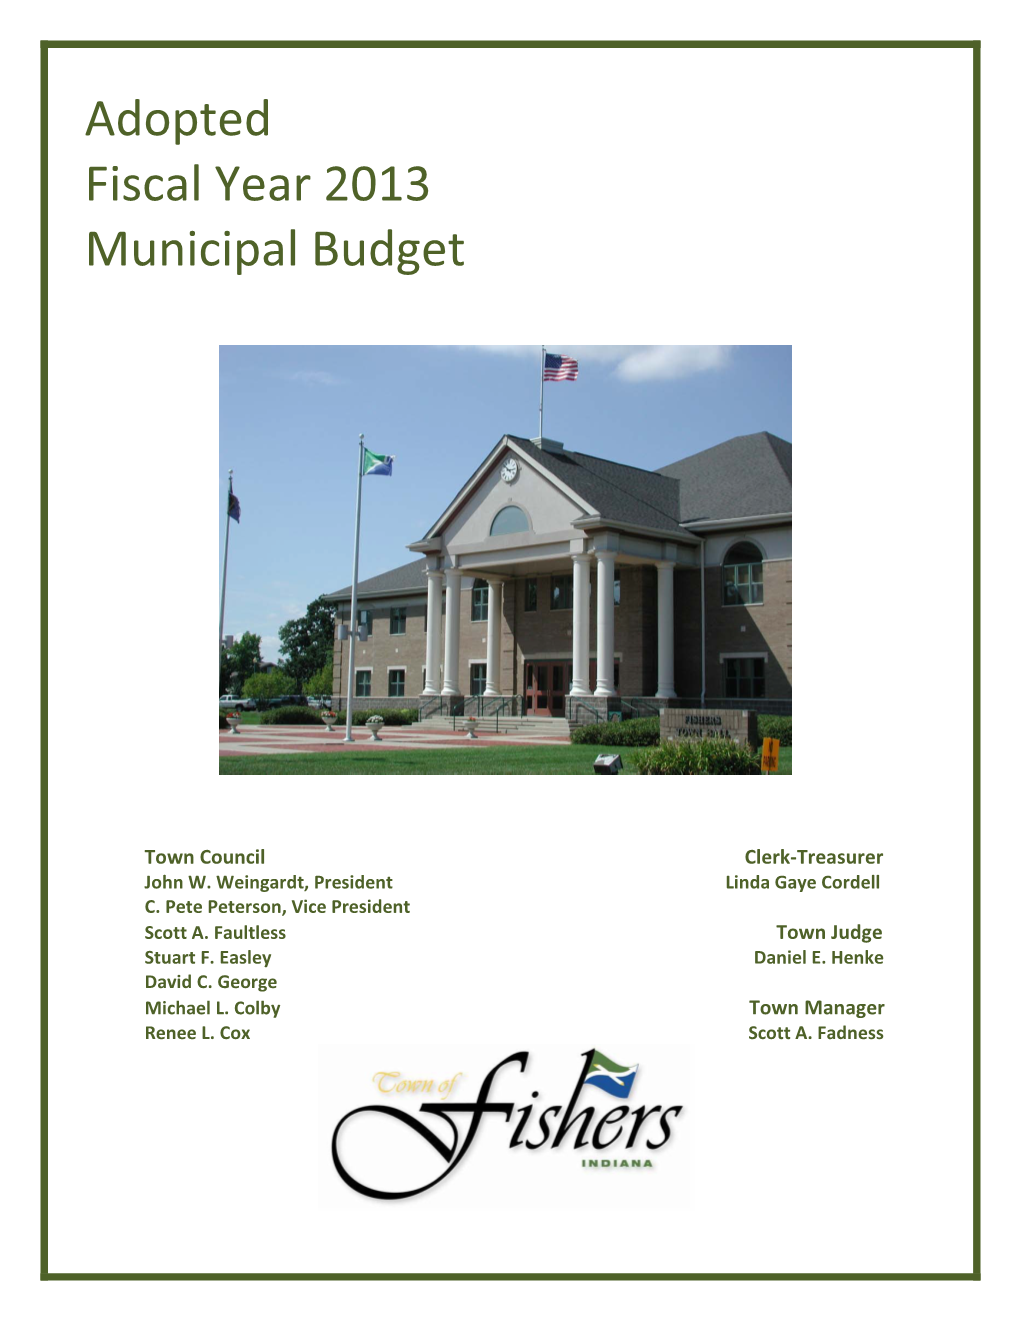 Adopted Fiscal Year 2013 Municipal Budget